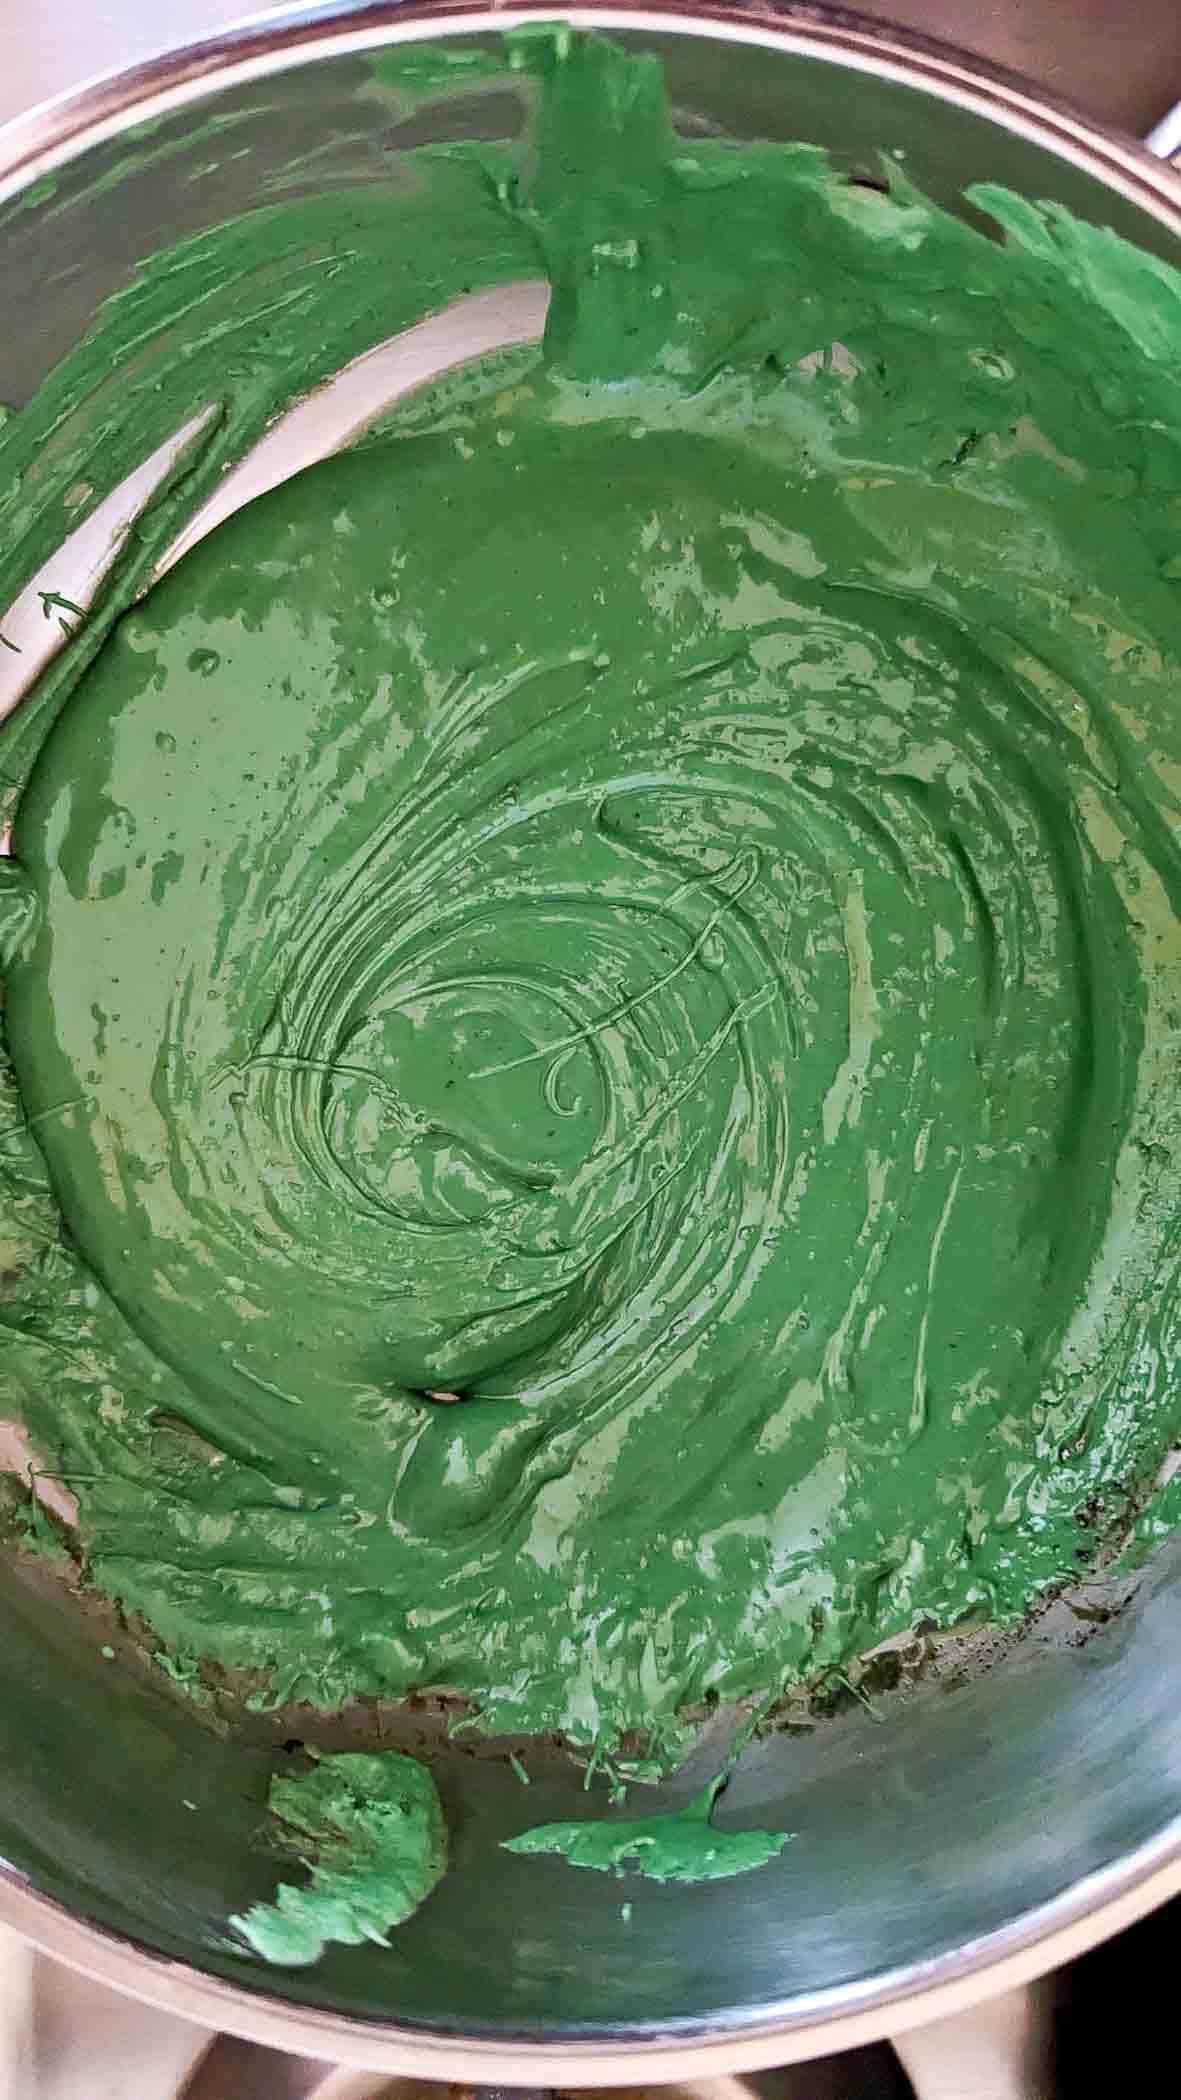 green candy melts, melted in sauce pan.